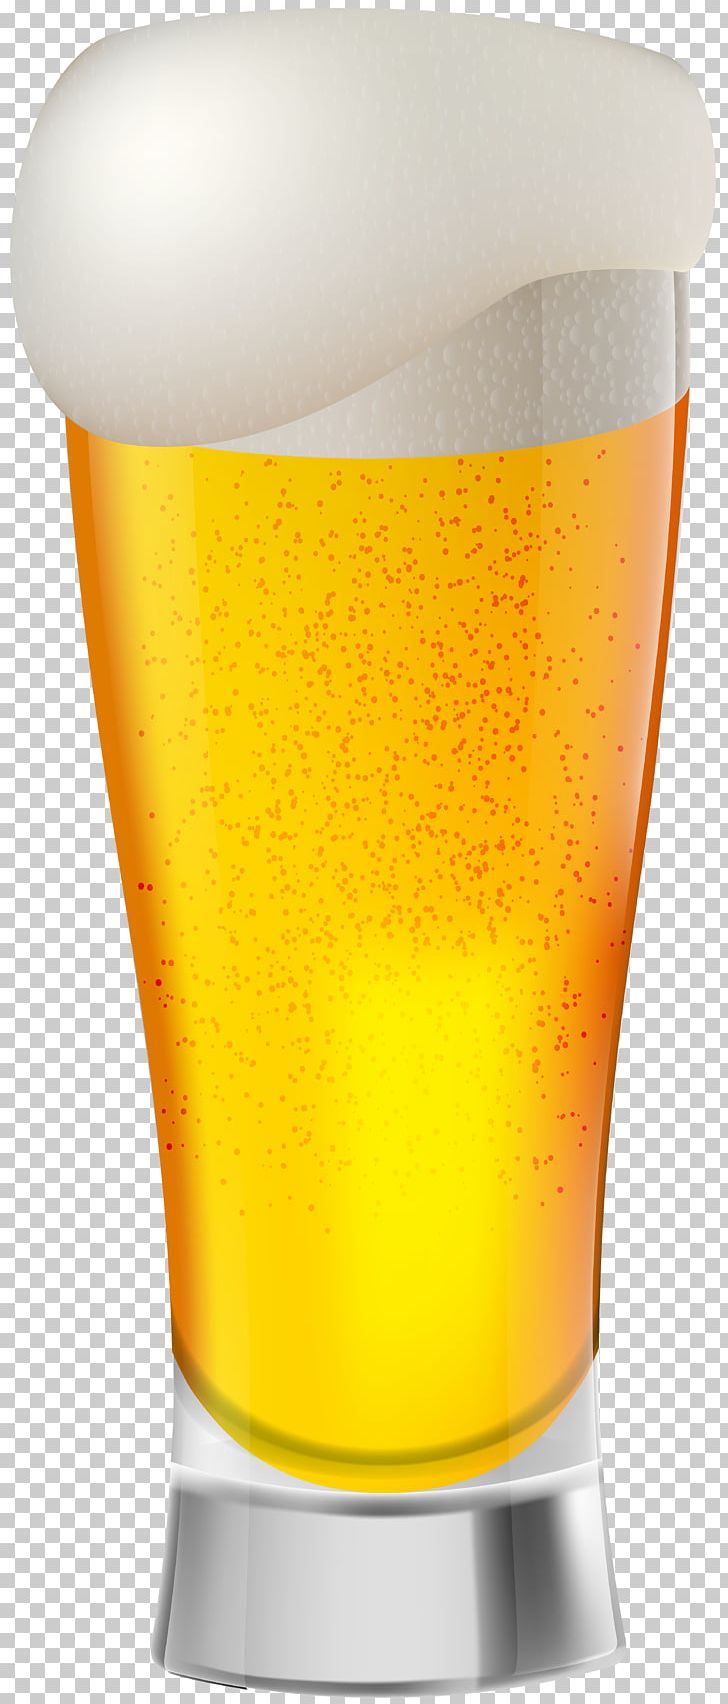 Beer Glasses Portable Network Graphics Imperial Pint PNG, Clipart, Alcoholic Beverages, Beer, Beer Glass, Beer Glasses, Champagne Glass Free PNG Download